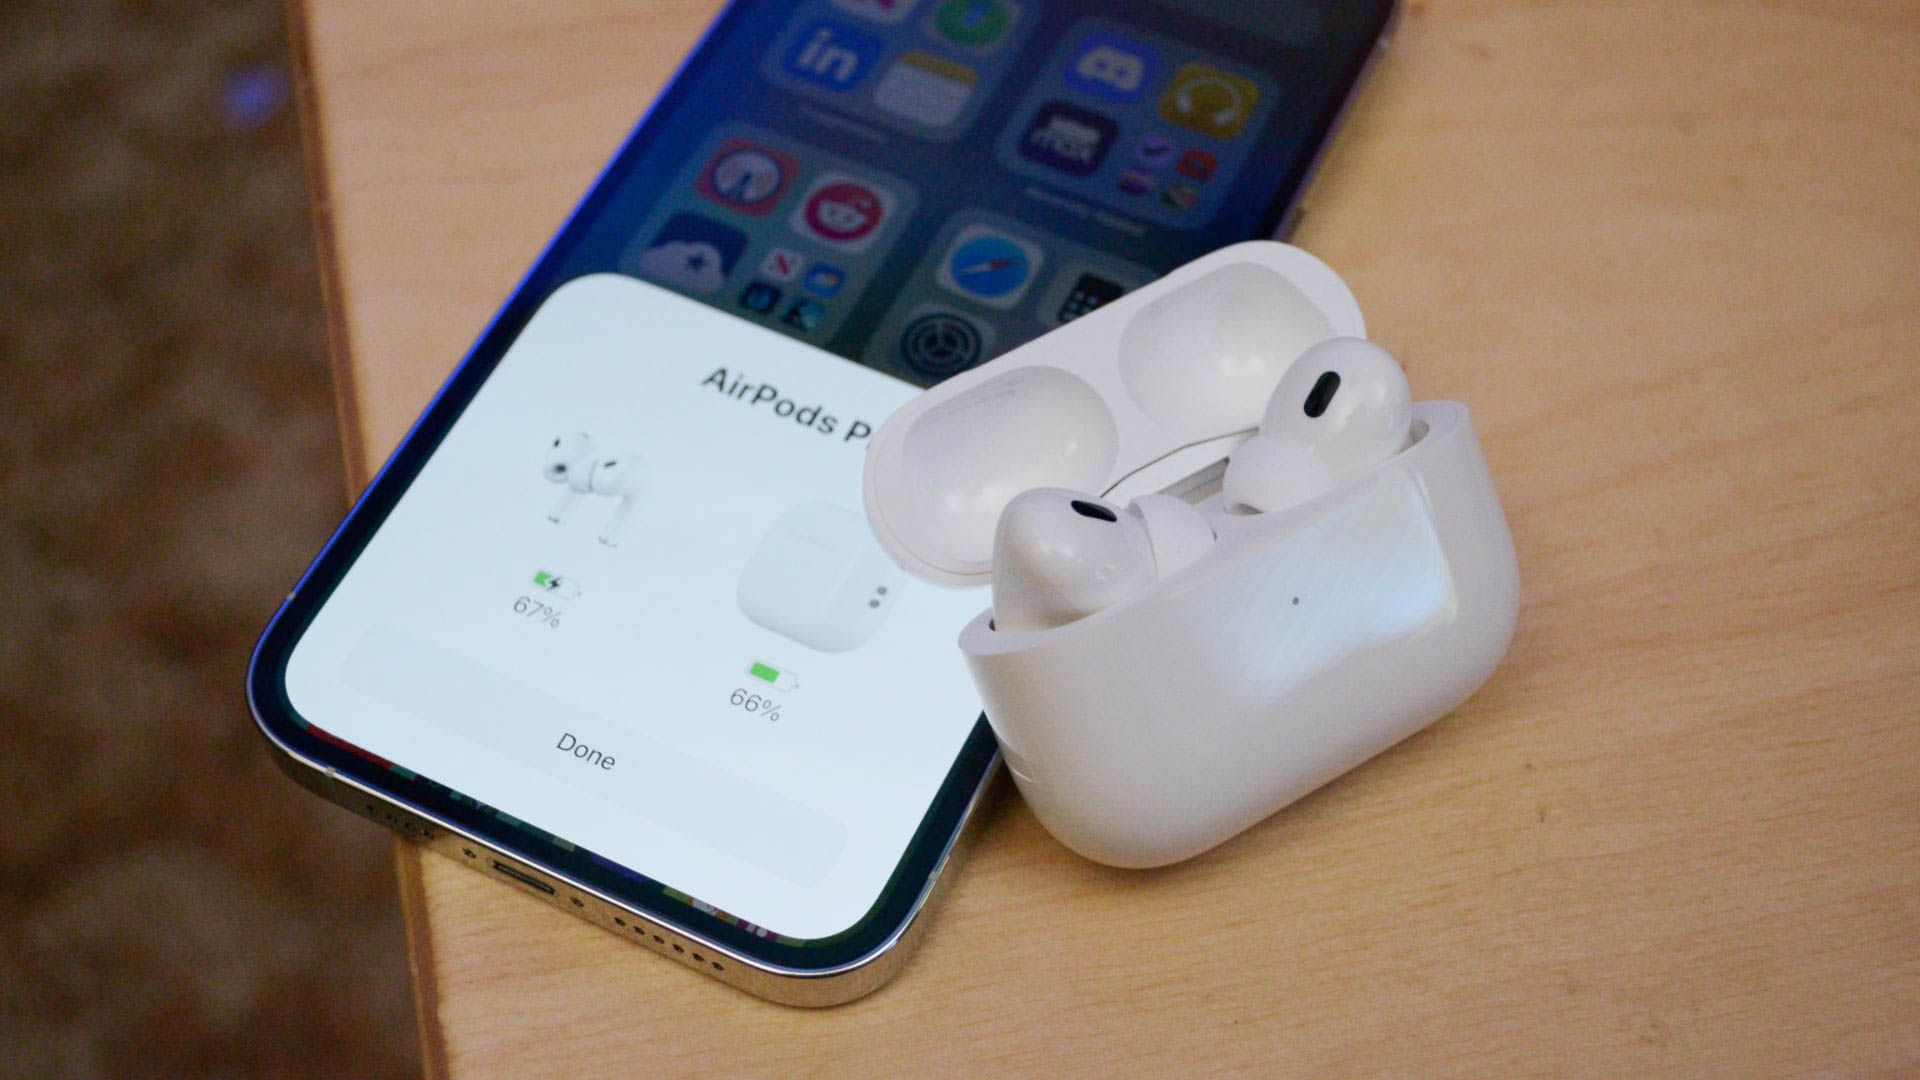 Pairing the AirPods Pro 2 automatically with iPhone